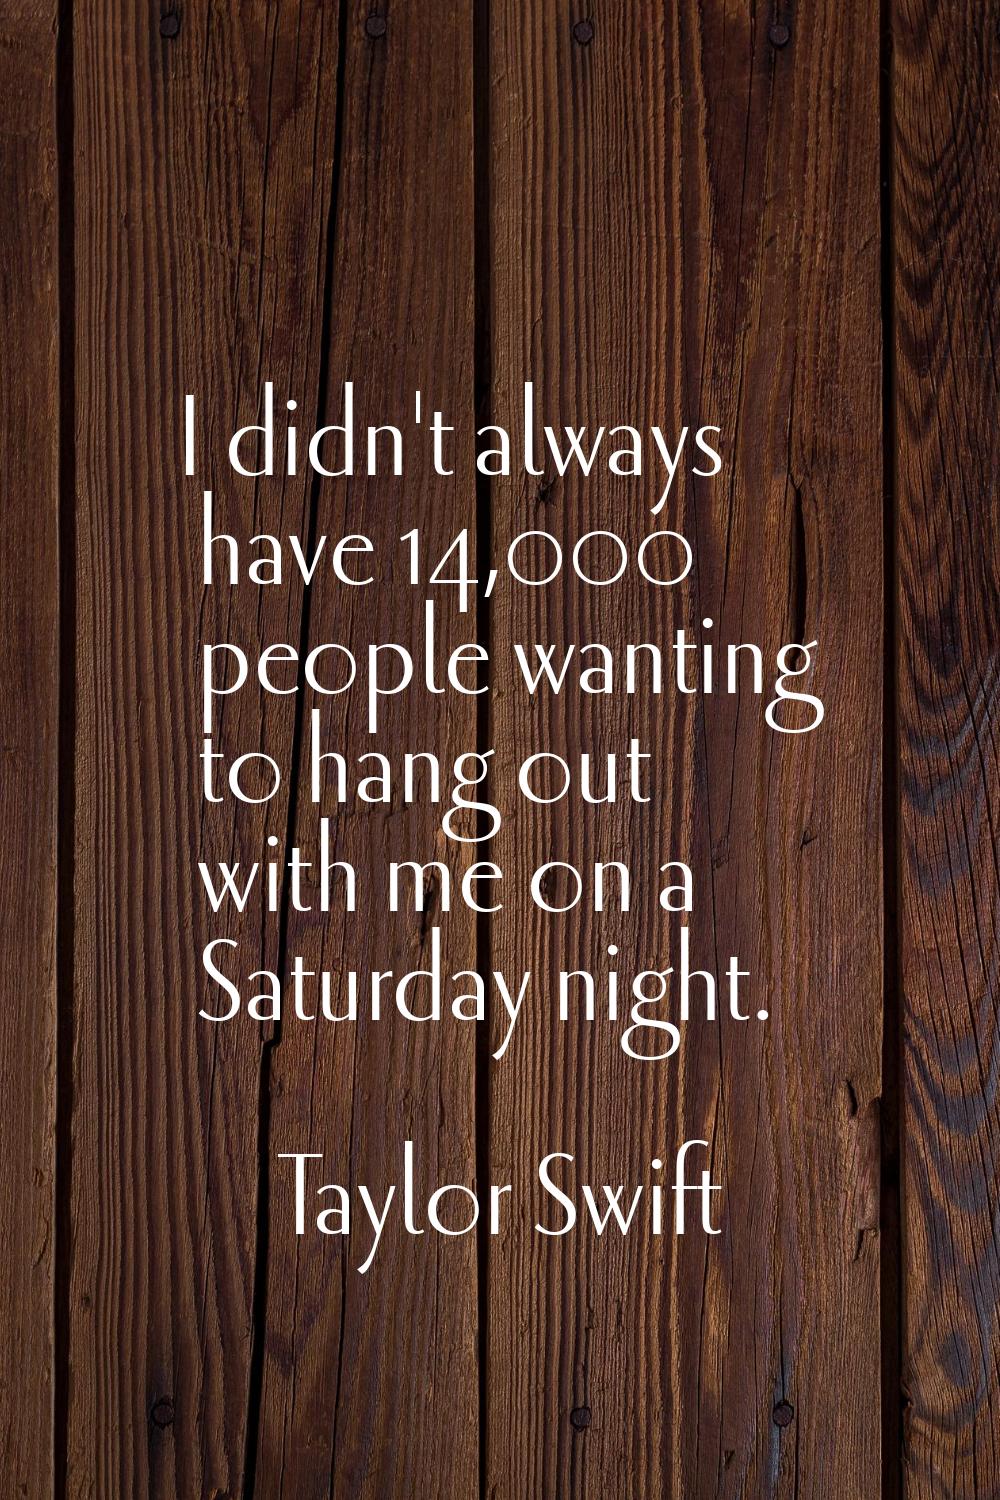 I didn't always have 14,000 people wanting to hang out with me on a Saturday night.